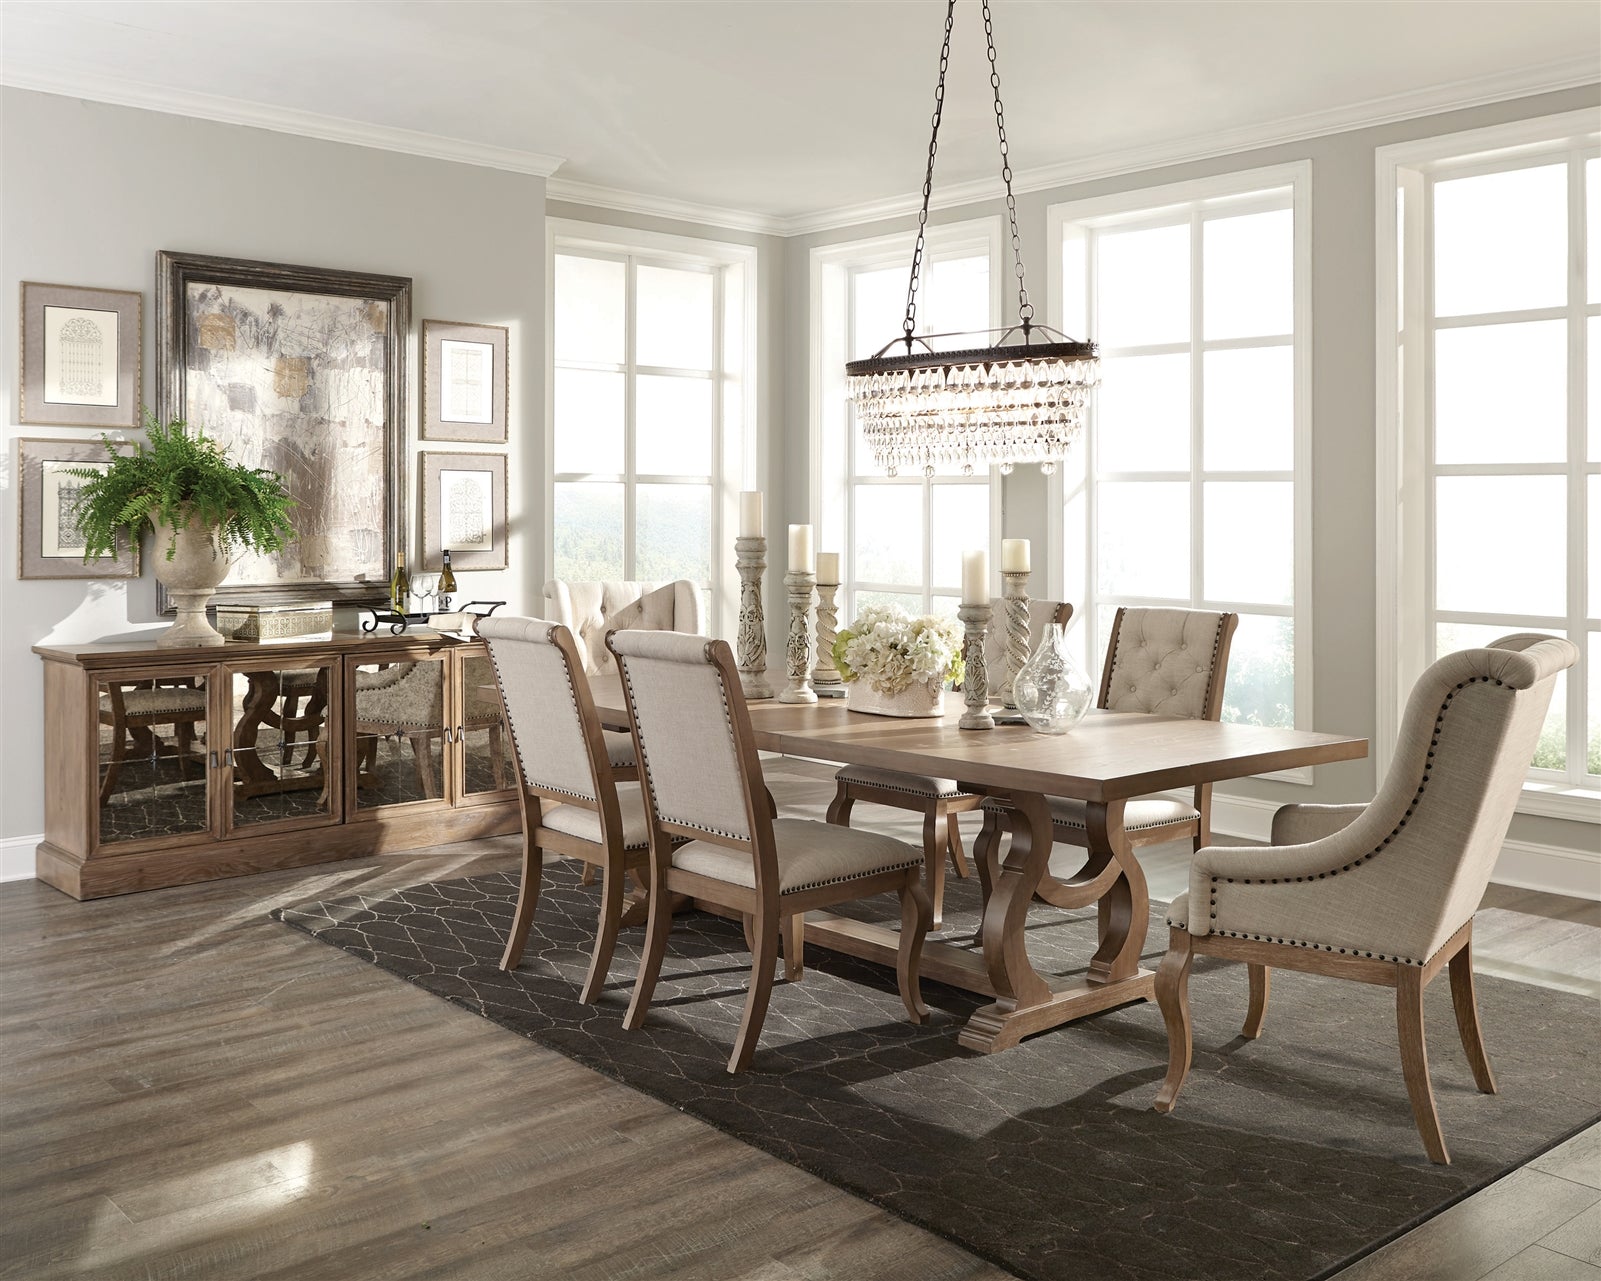 Brockway Cove Transitional Style 7 Piece Dining Set